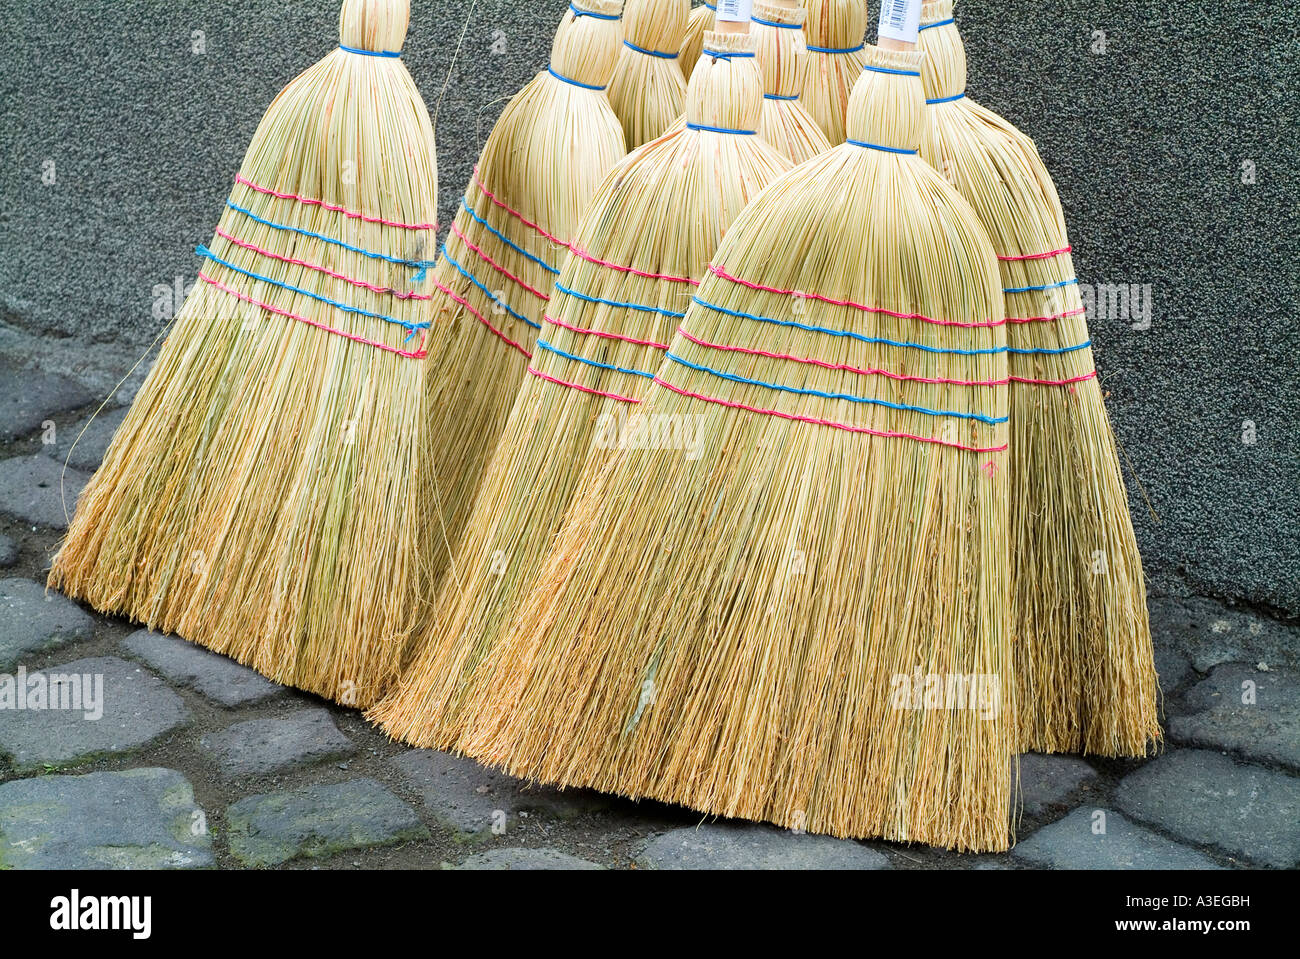 Birch Brooms on a Market Stock Photo